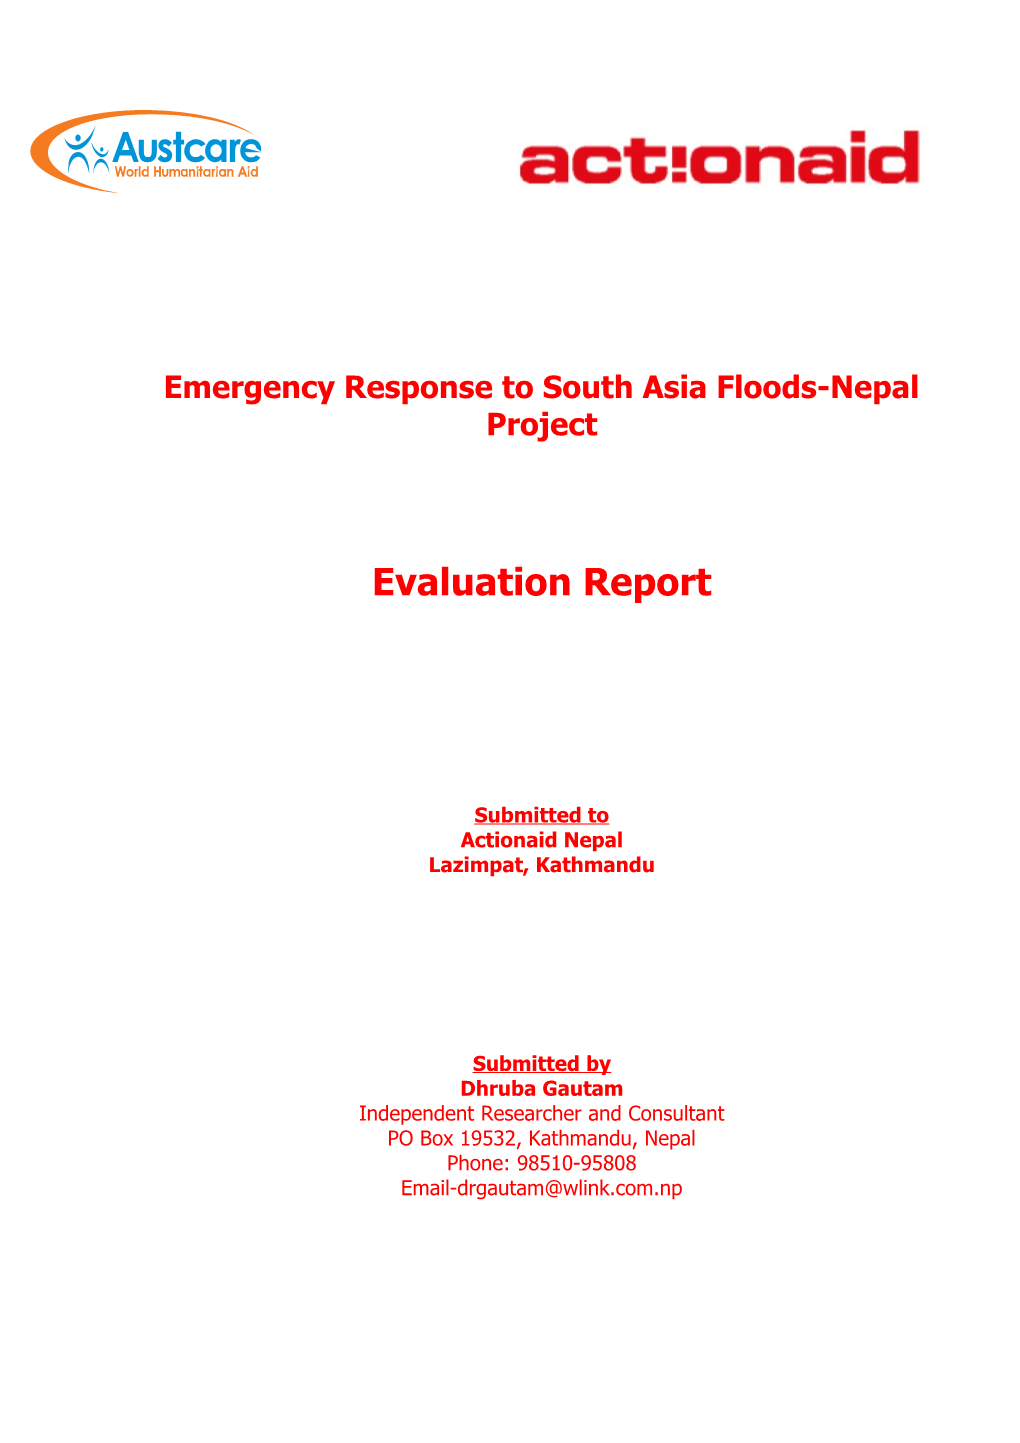 Emergency Response to South Asia Floods-Nepal Project